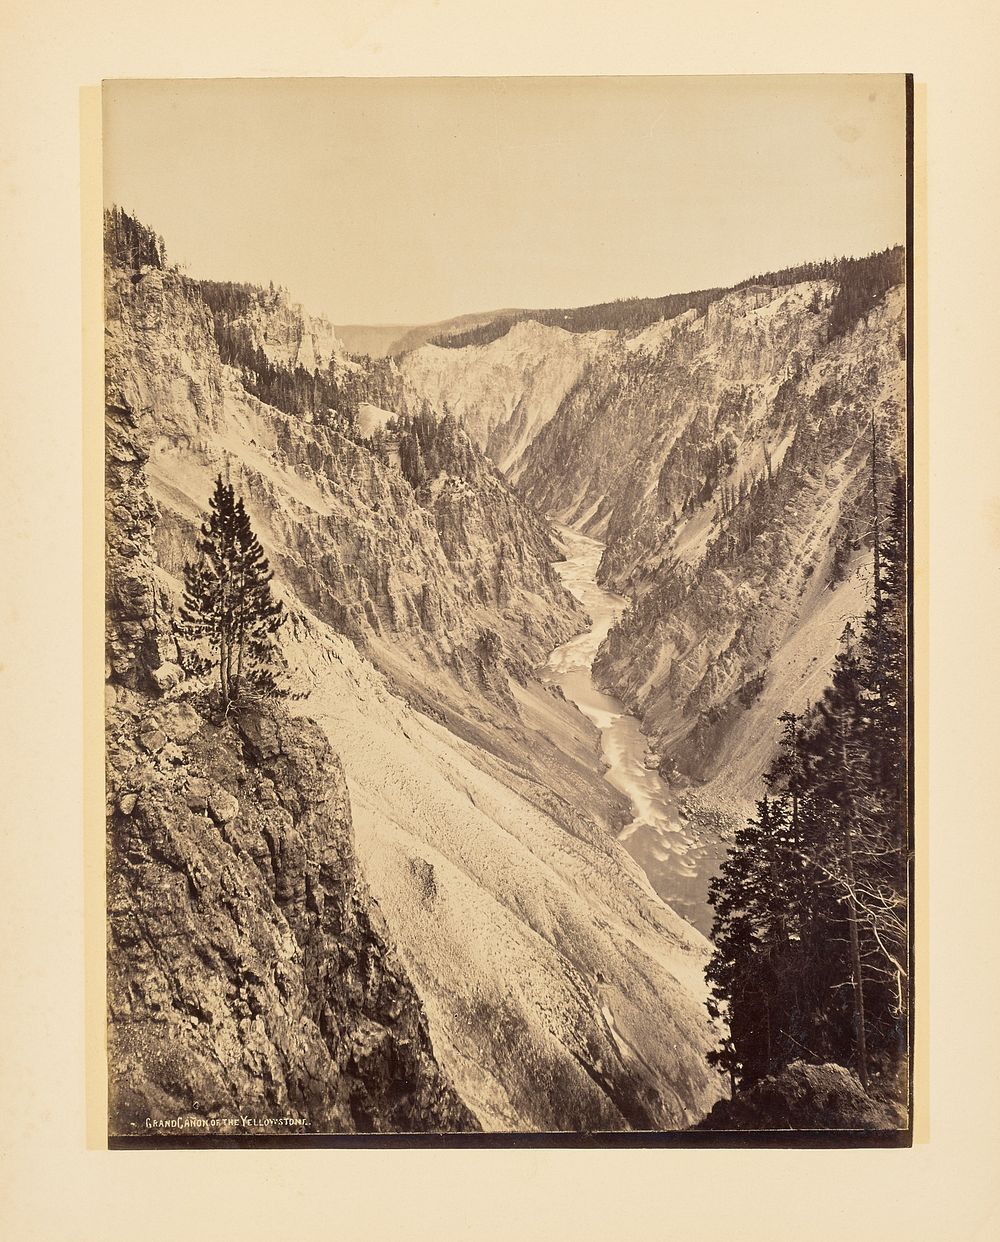 Grand Canon of the Yellowstone by John K Hillers